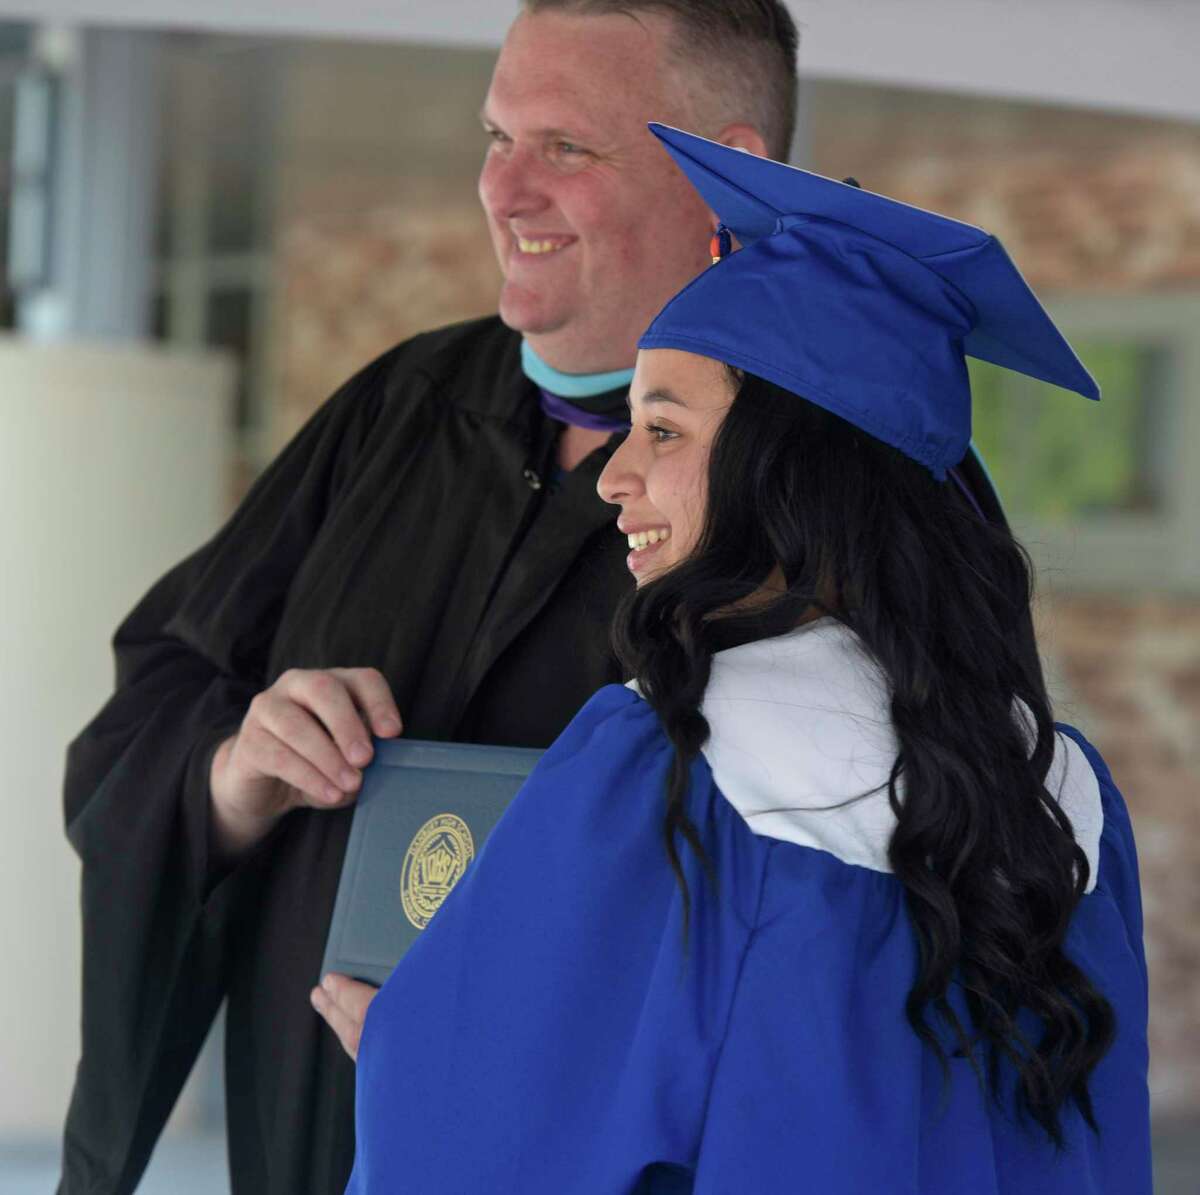 Principal Daniel Donovan posses for a photograph with graduate Aaliyah Jade Alonso during the 2020 Danbury High School graduation, Wednesday, June 10, 2020, at Danbury High School, Danbury, Conn. Graduation is taking place over three days, June 10, 11, and 12.